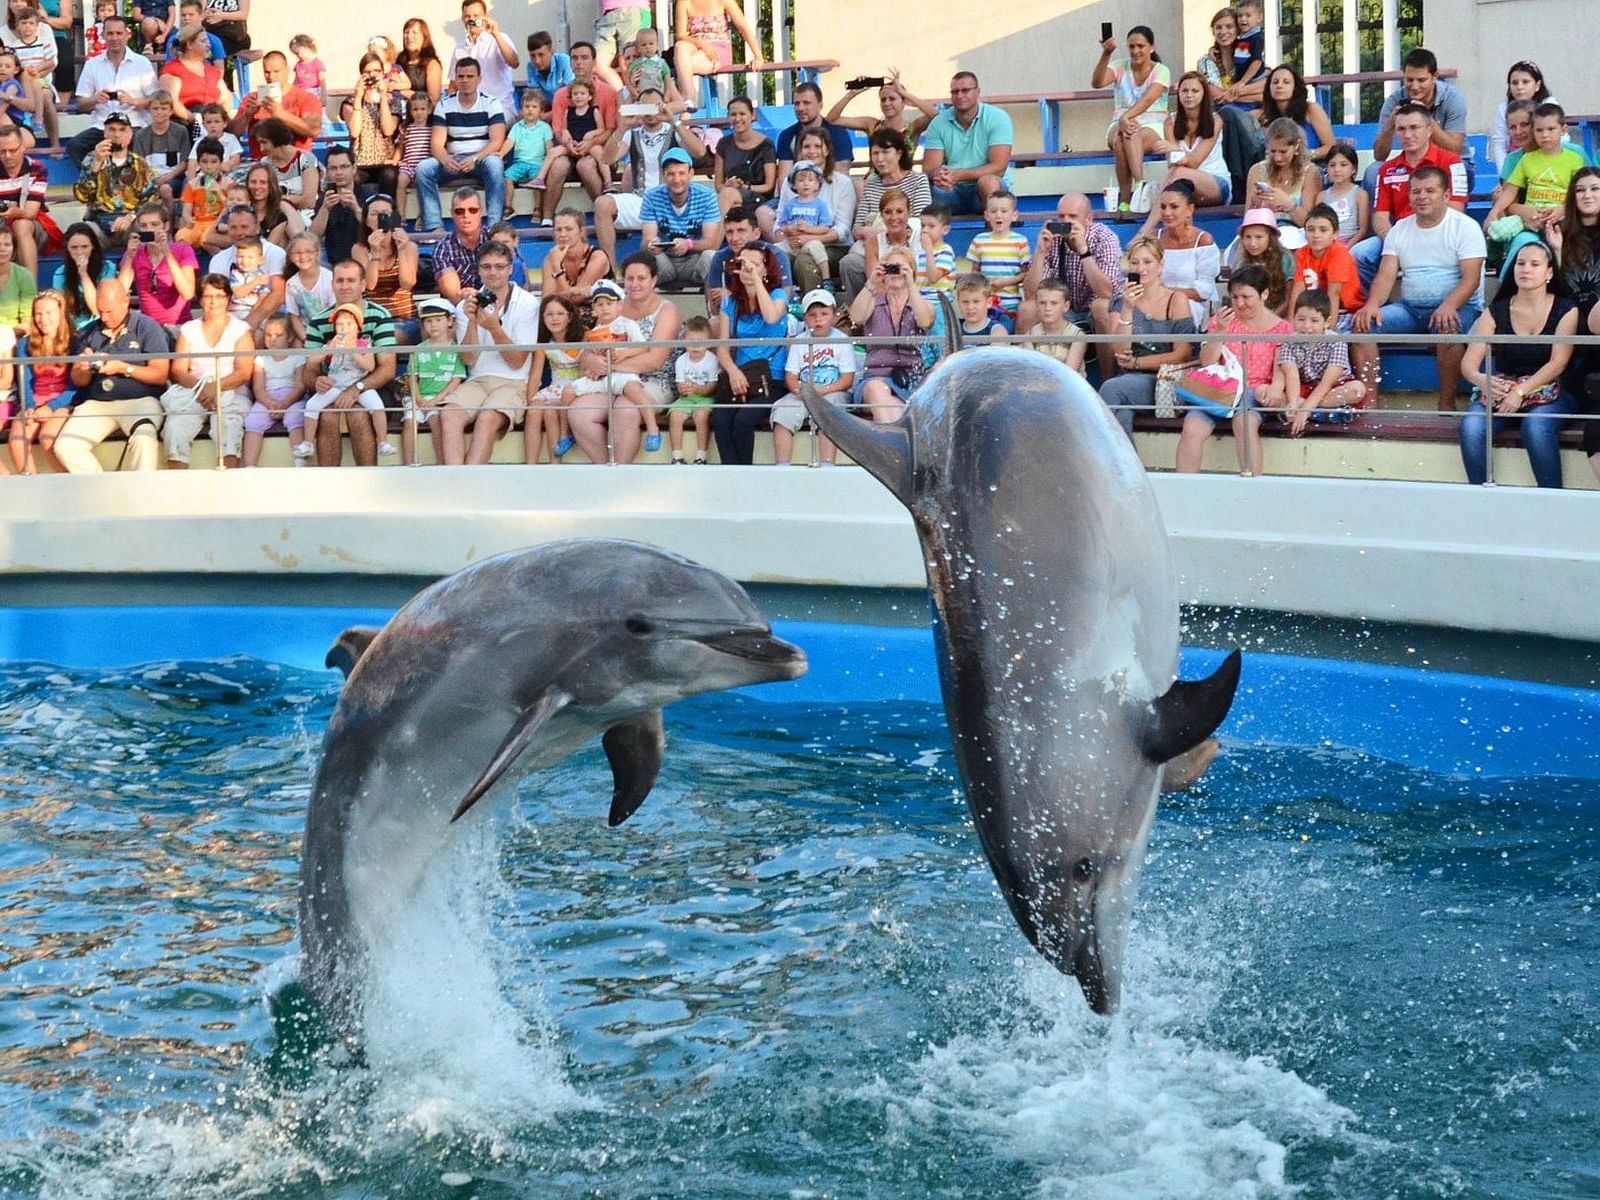 Dolphin show in the Dolphinarium near Ana Hotels